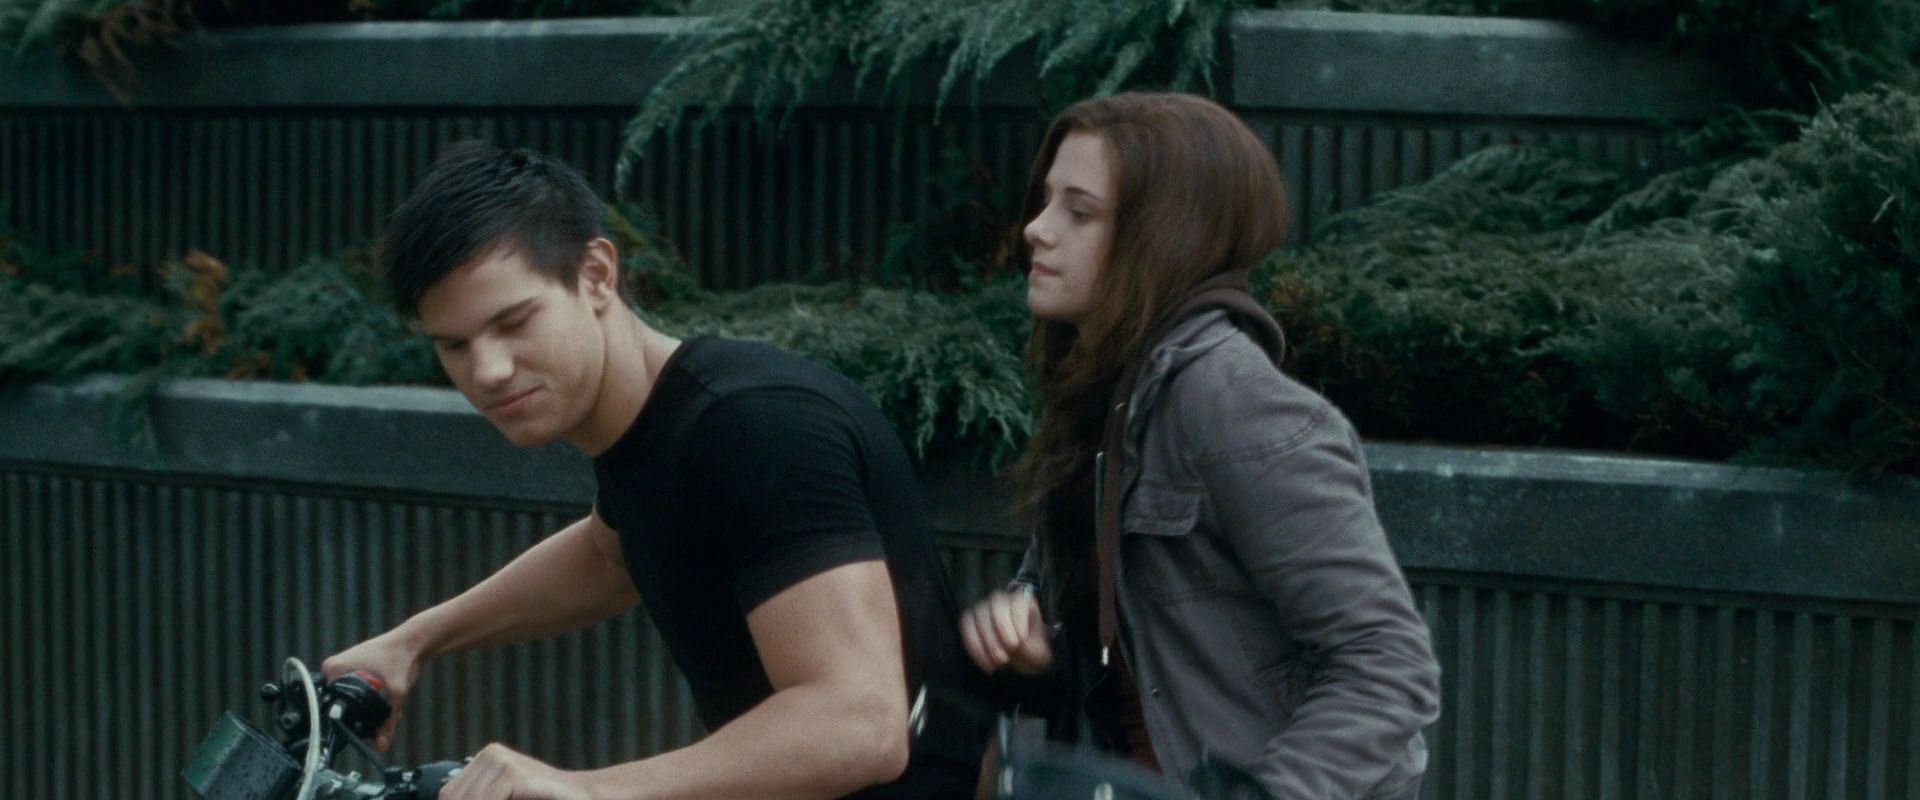 Jacob and Bella Images on Fanpop.